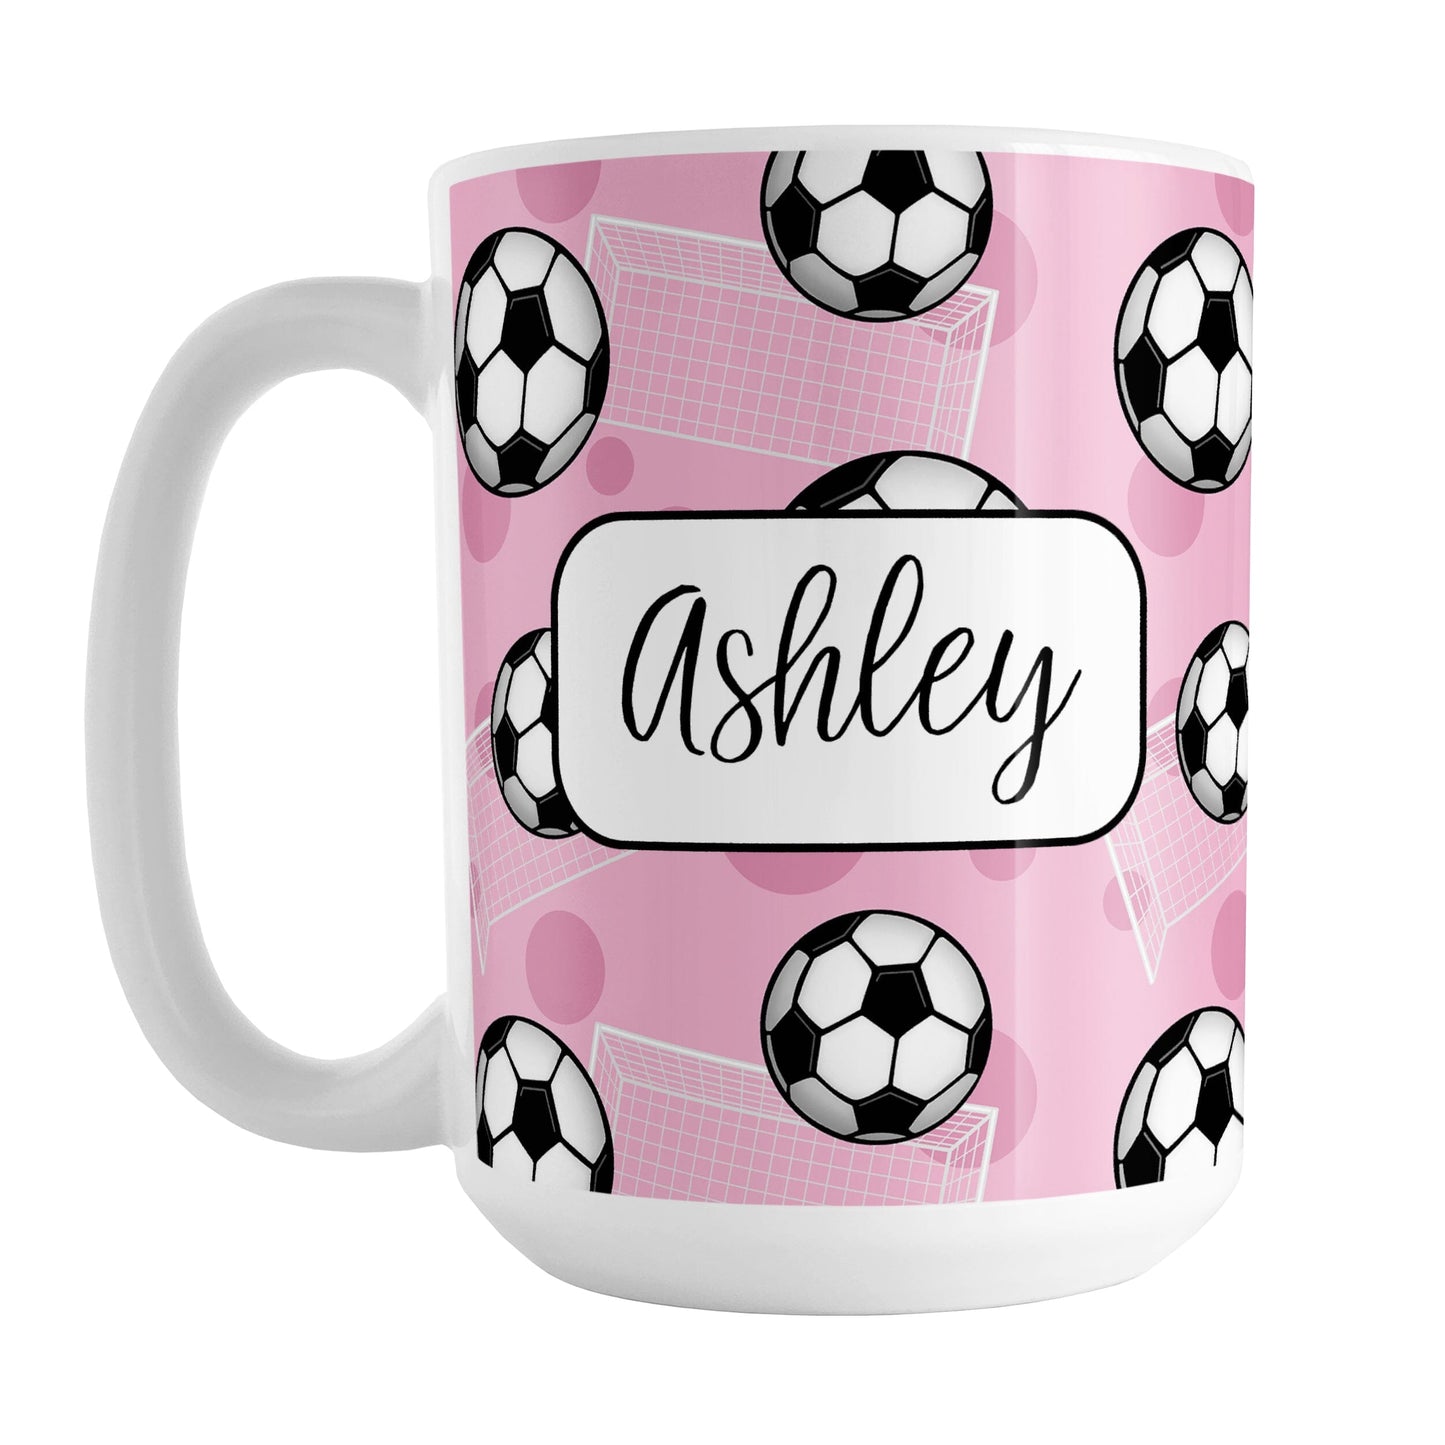 Soccer Ball and Goal Personalized Pink Soccer Mug (15oz) at Amy's Coffee Mugs. A ceramic coffee mug designed with a pattern of soccer balls and white soccer goals over a pink background with pink circles. Your personalized name is custom-printed in a fun black script font on both sides of the mug over the soccer pattern. 